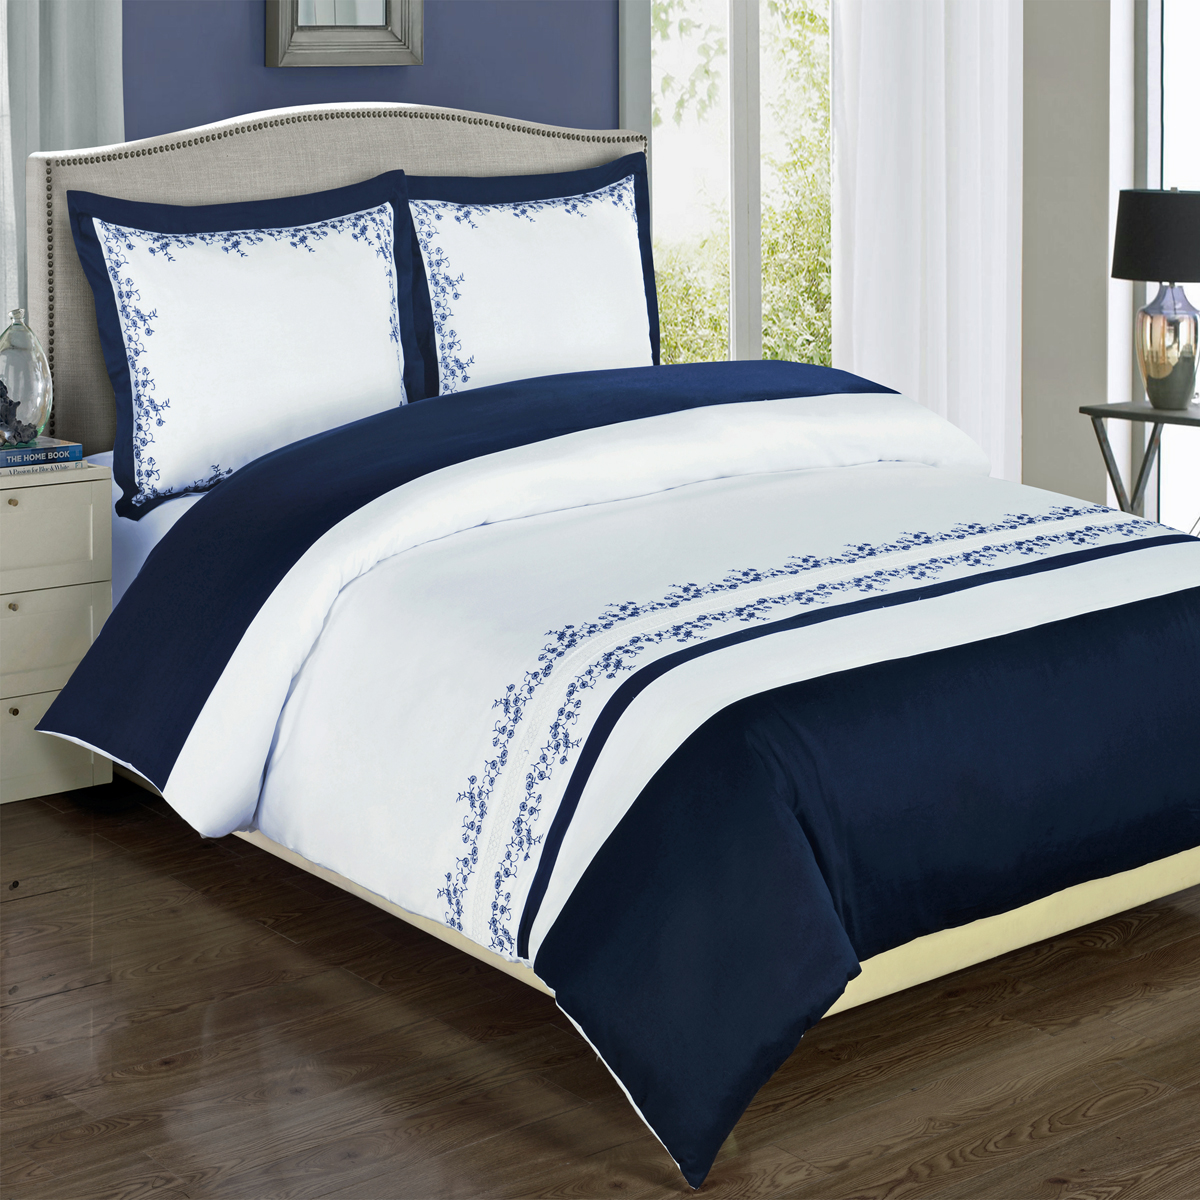 GoLinens Luxury Premium Extra Long Staple Combed Cotton 4 Piece Navy Blue Embroidered Duvet Cover Set with Comforter  Pillow Shams